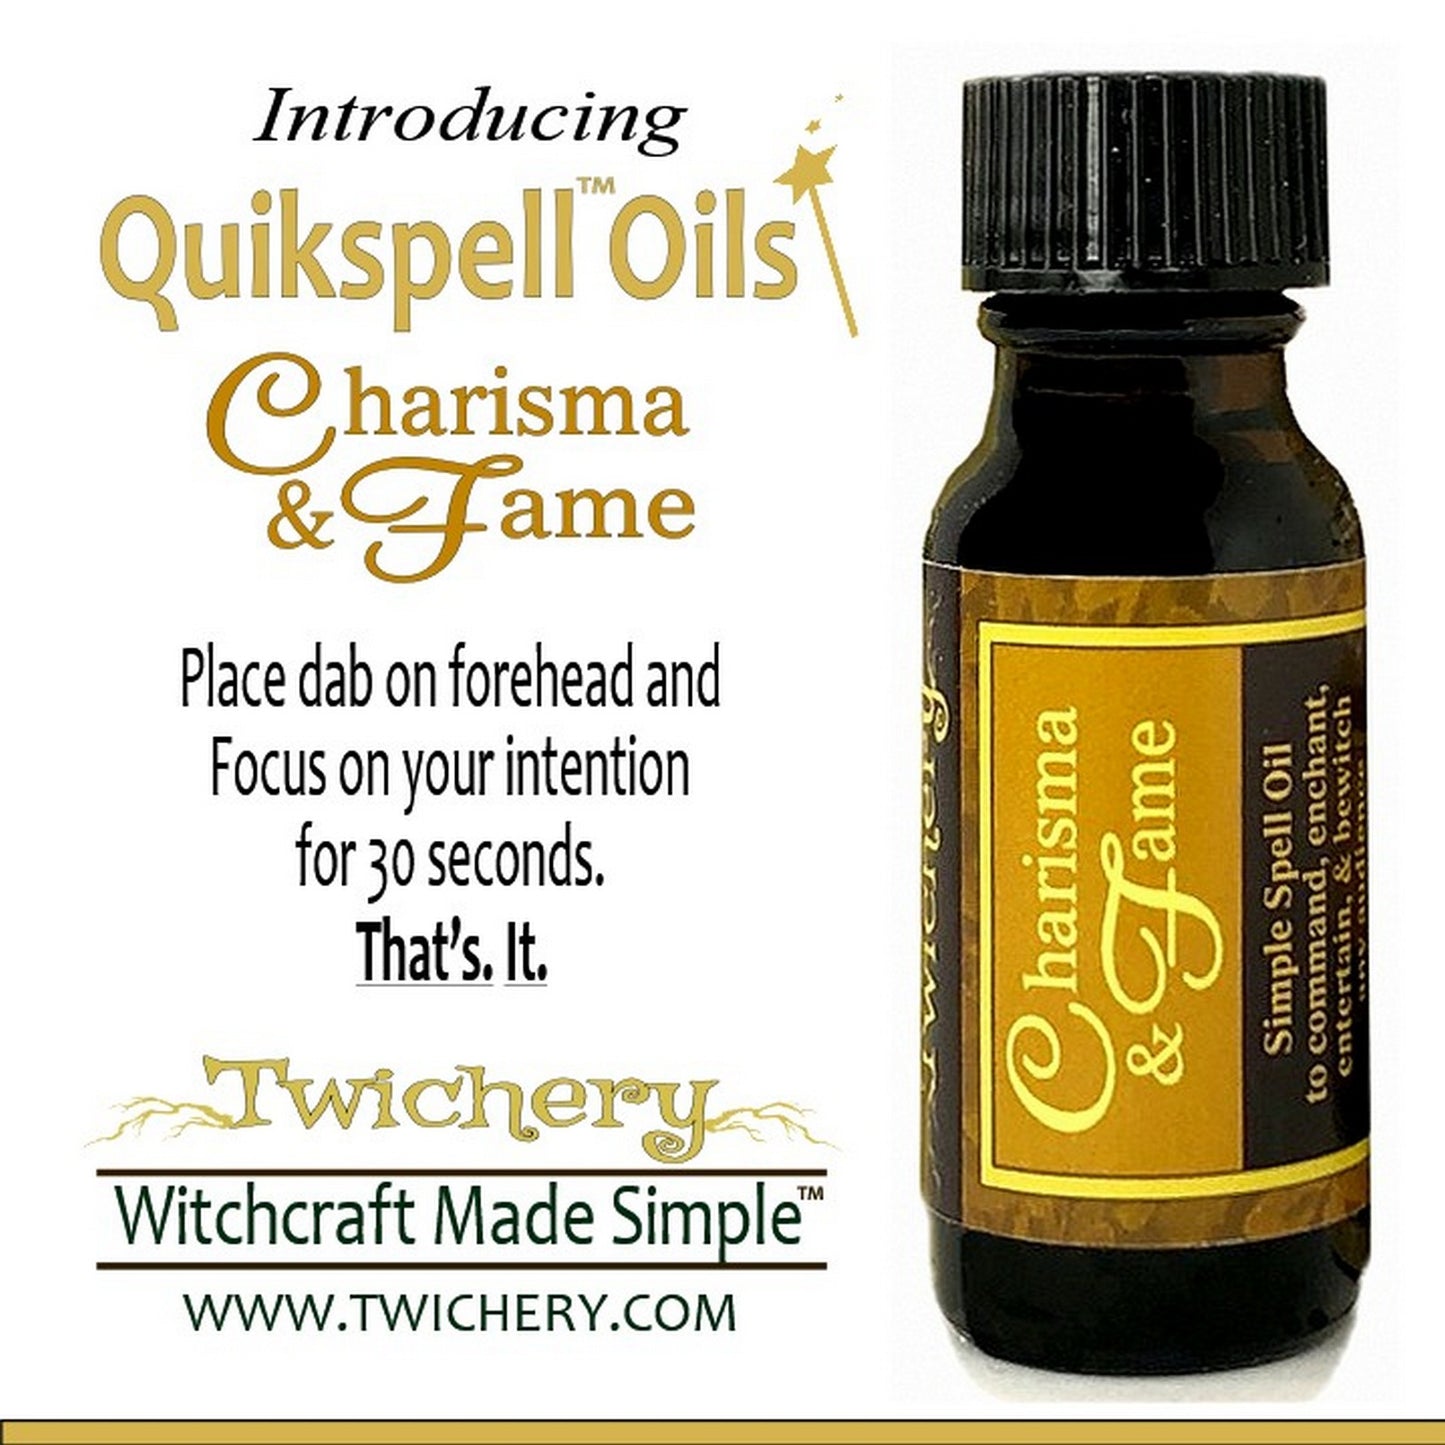 Twichery Charisma & Fame Quikspell Oil is for achieving the life you have always dreamed of. Hoodoo voodoo wicca Pagan, Witchcraft Made Simple